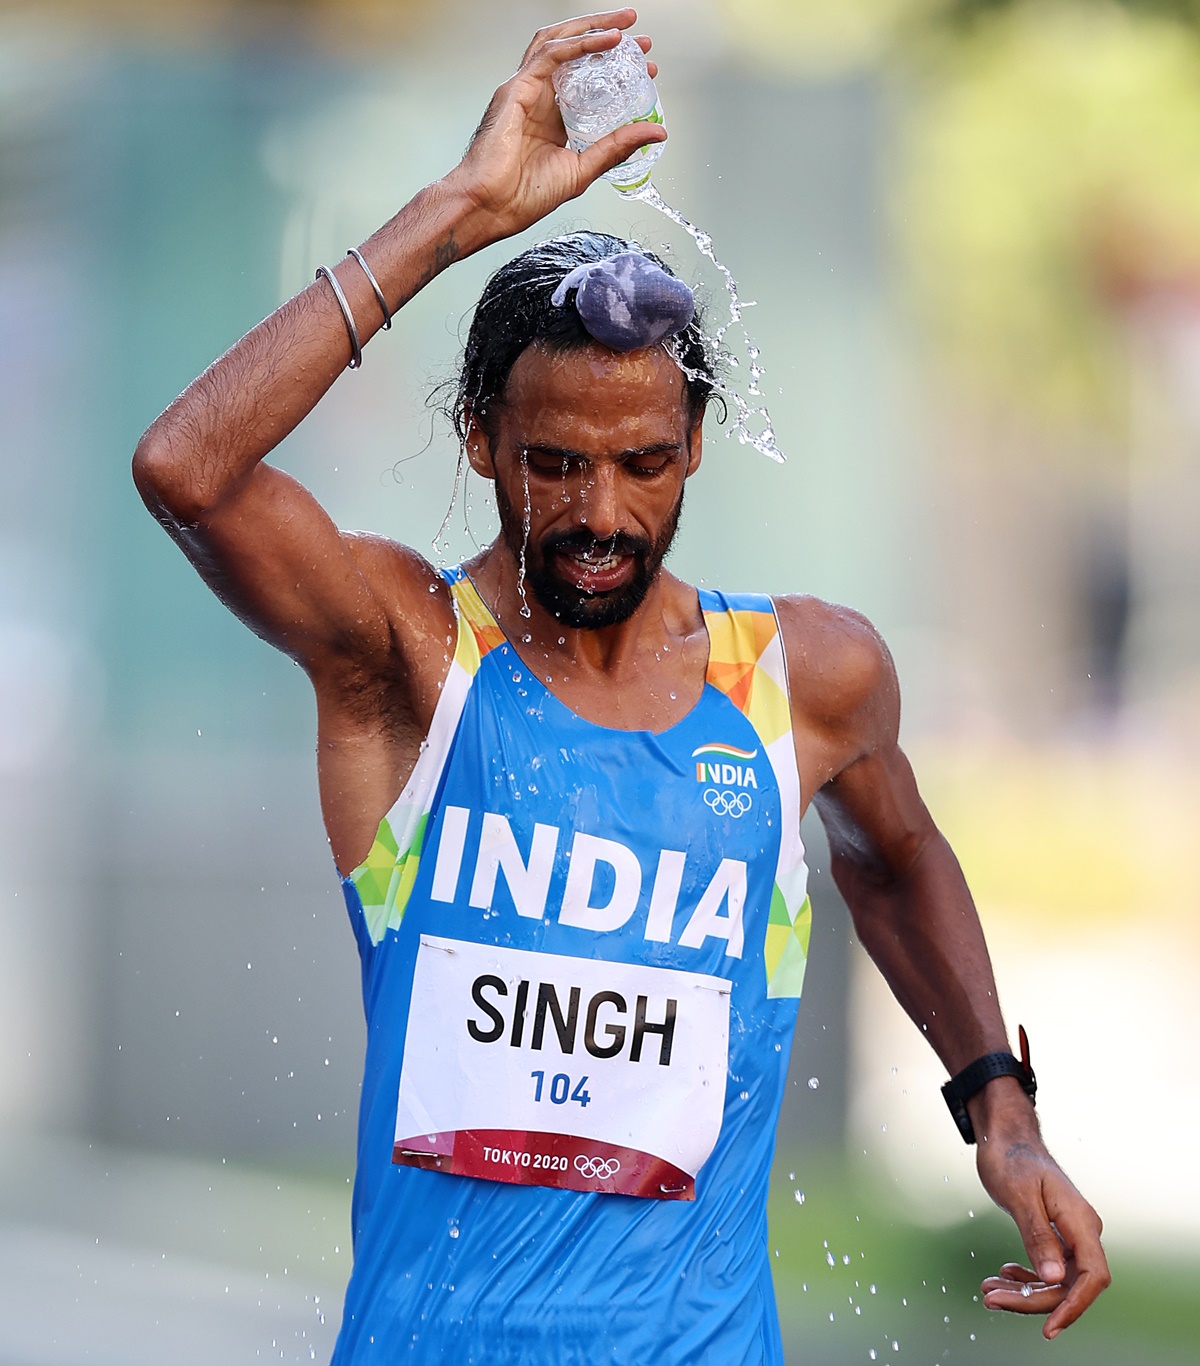 India's Gurpreet Singh competes in the Olympics men's 50km Race Walk final, at Sapporo Odori Park in Sapporo, Japan, on Thursday.